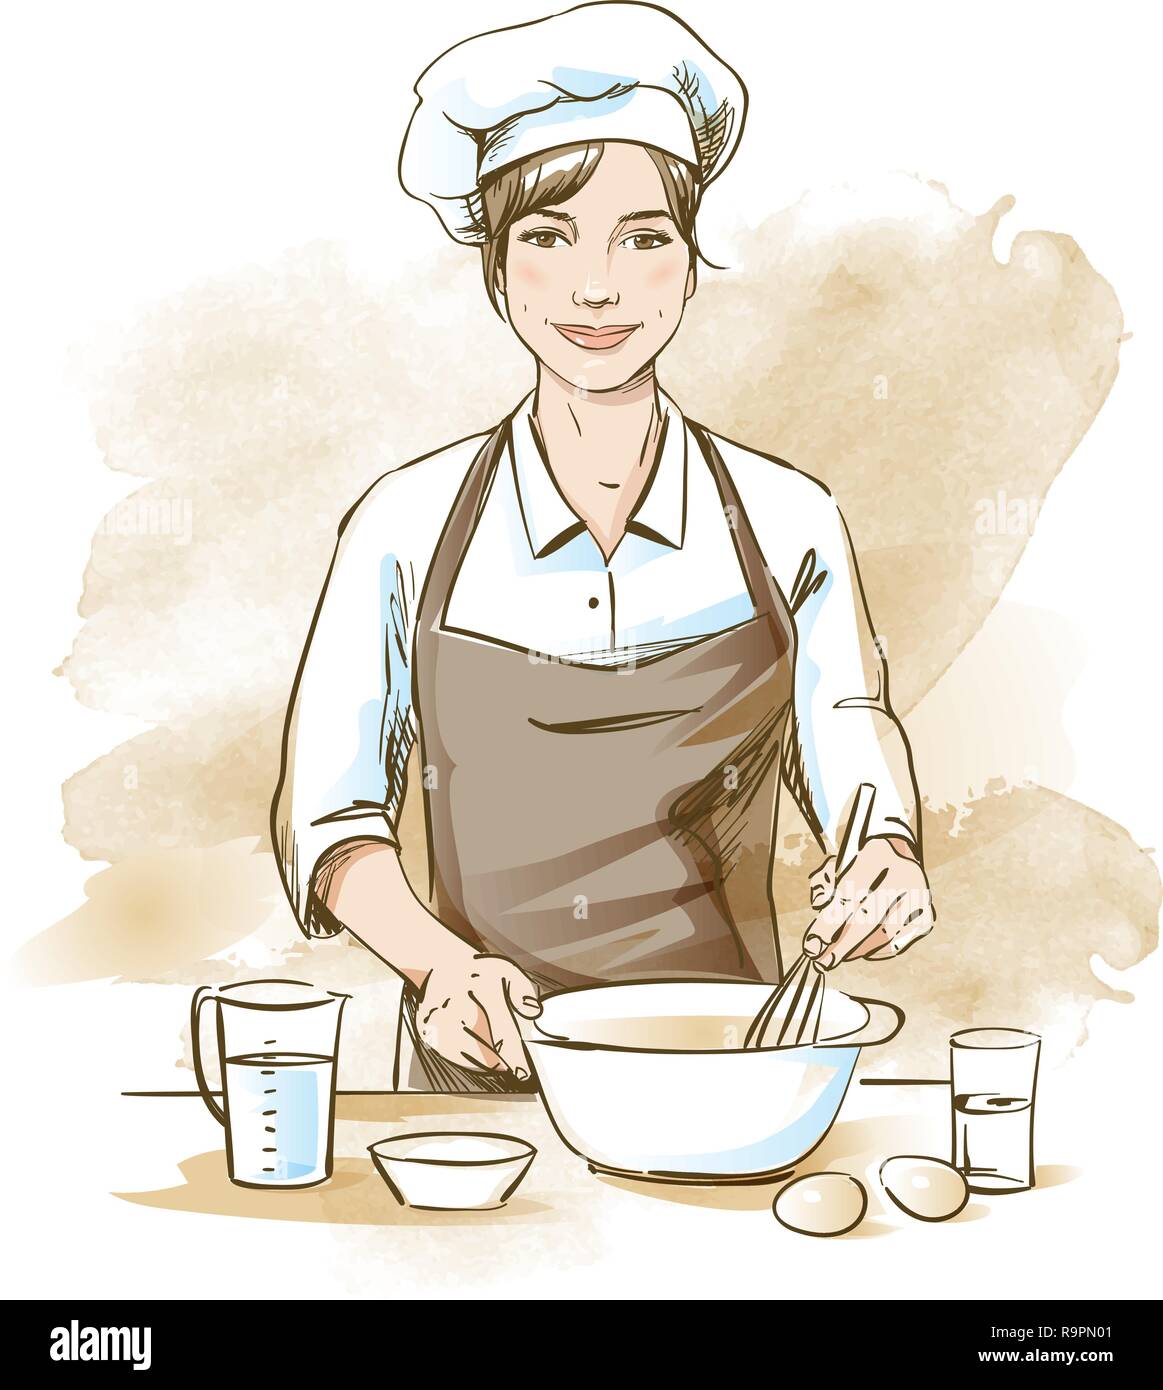 1,200+ Woman Pastry Chef Stock Illustrations, Royalty-Free Vector